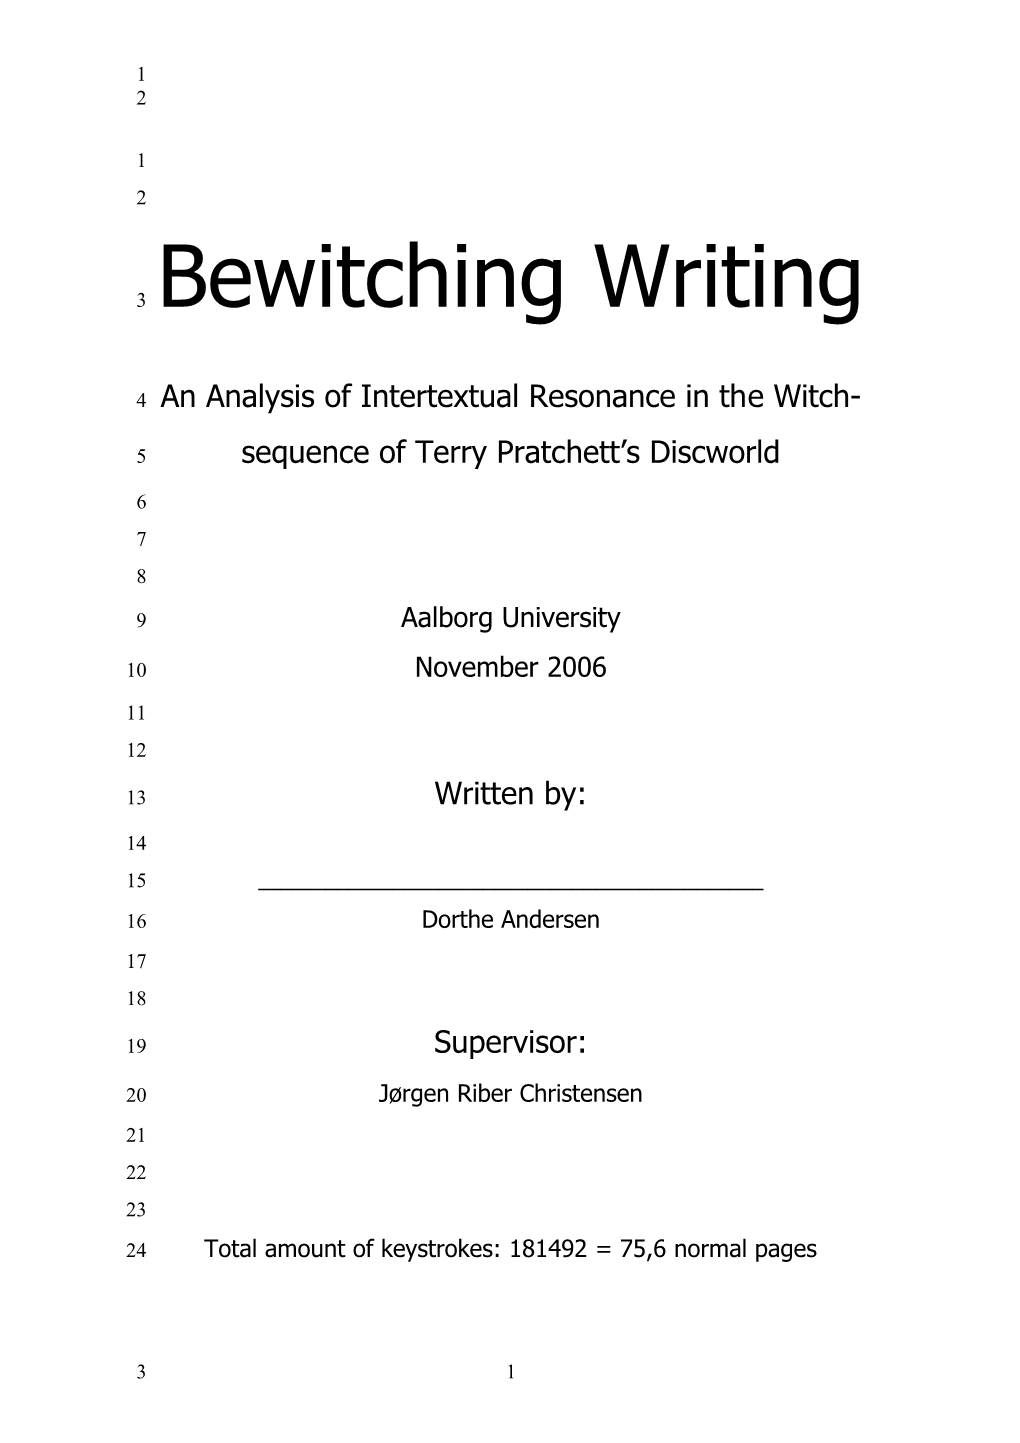 An Analysis of Intertextual Resonance in the Witch-Sequence of Terry Pratchett S Discworld